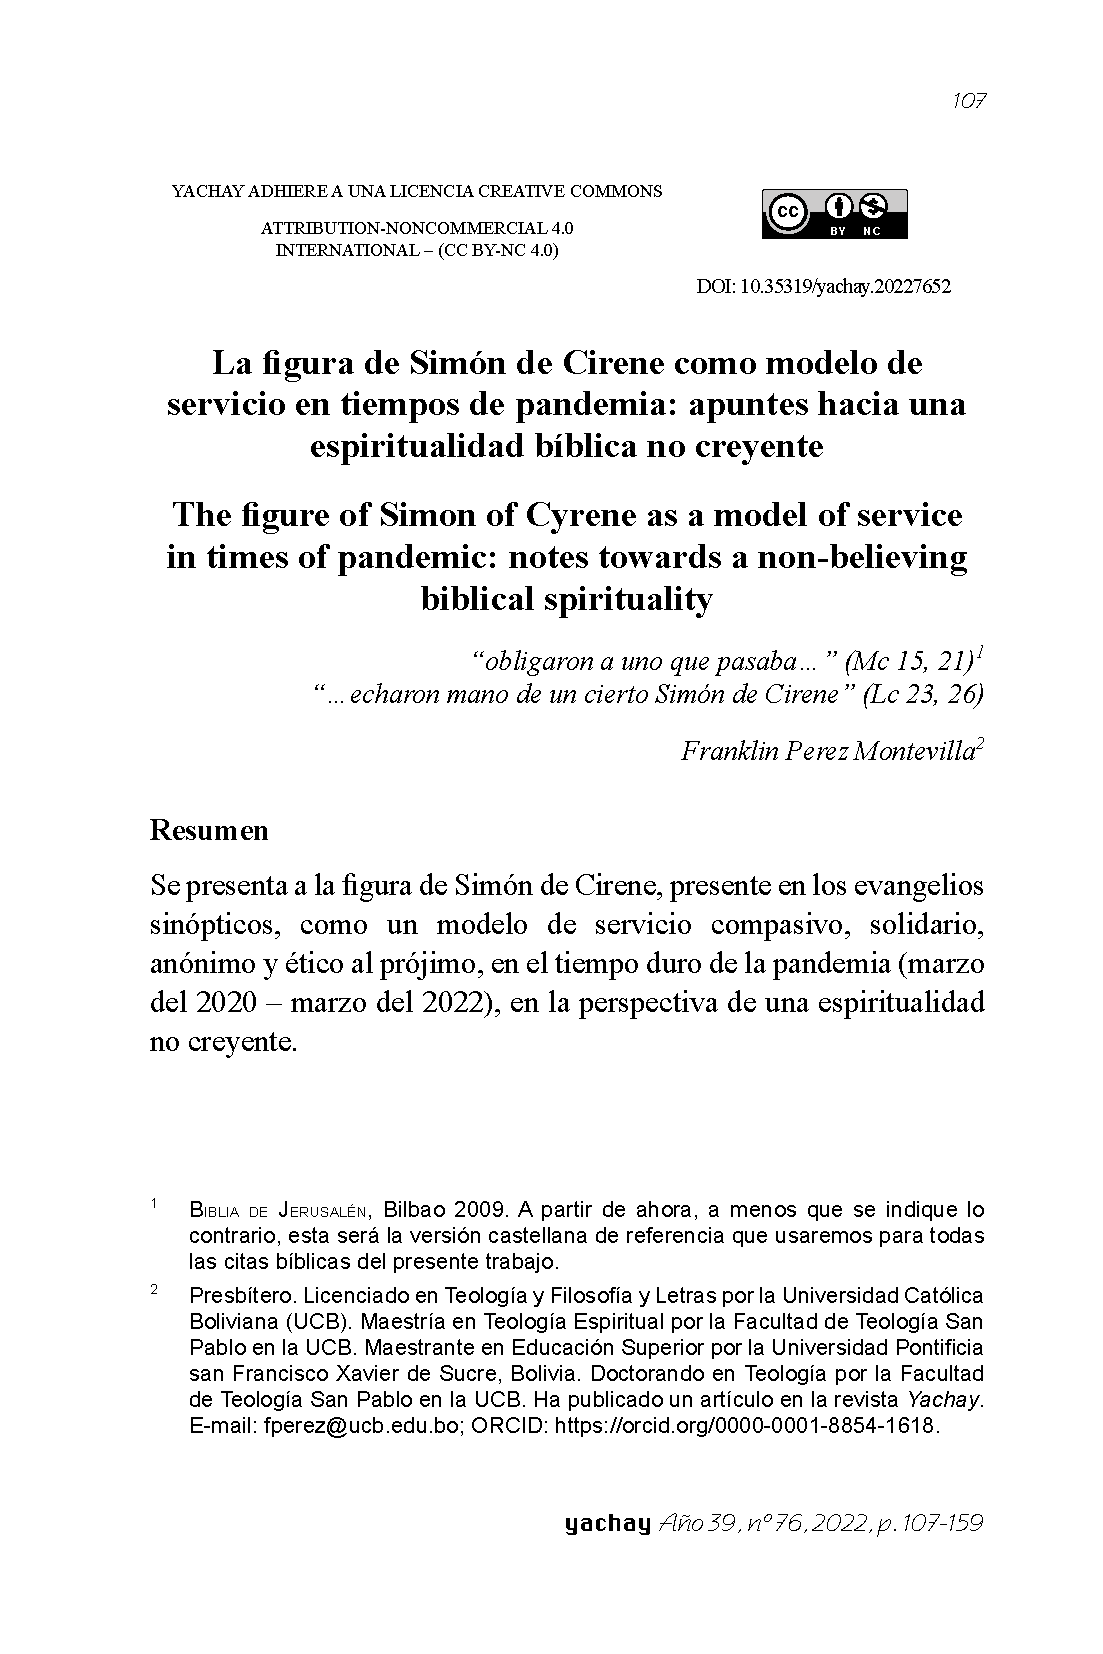 The figure of Simon of Cyrene as a model of service in times of pandemic: notes towards a non-believing biblical spirituality